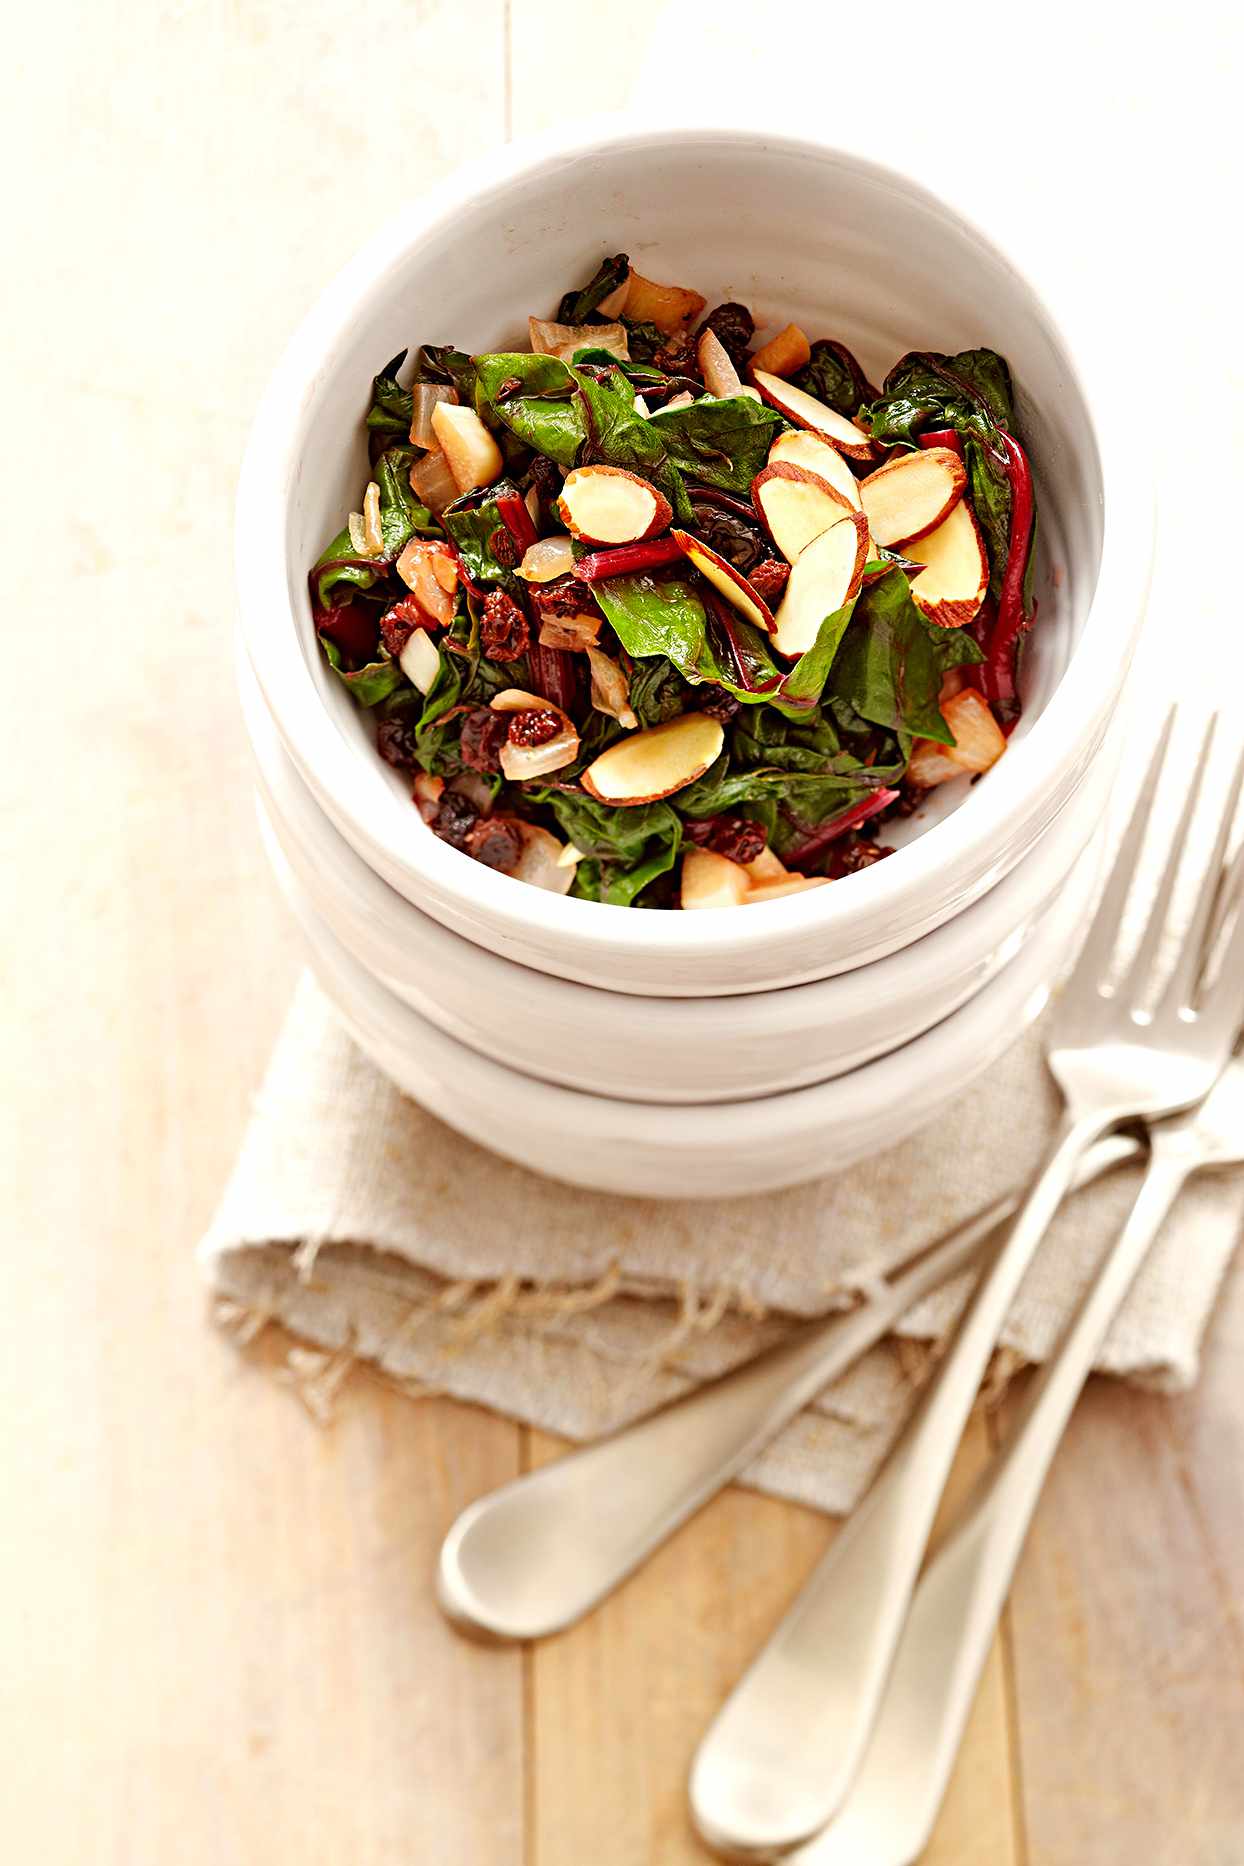 Braised Swiss Chard with Currants and Almonds